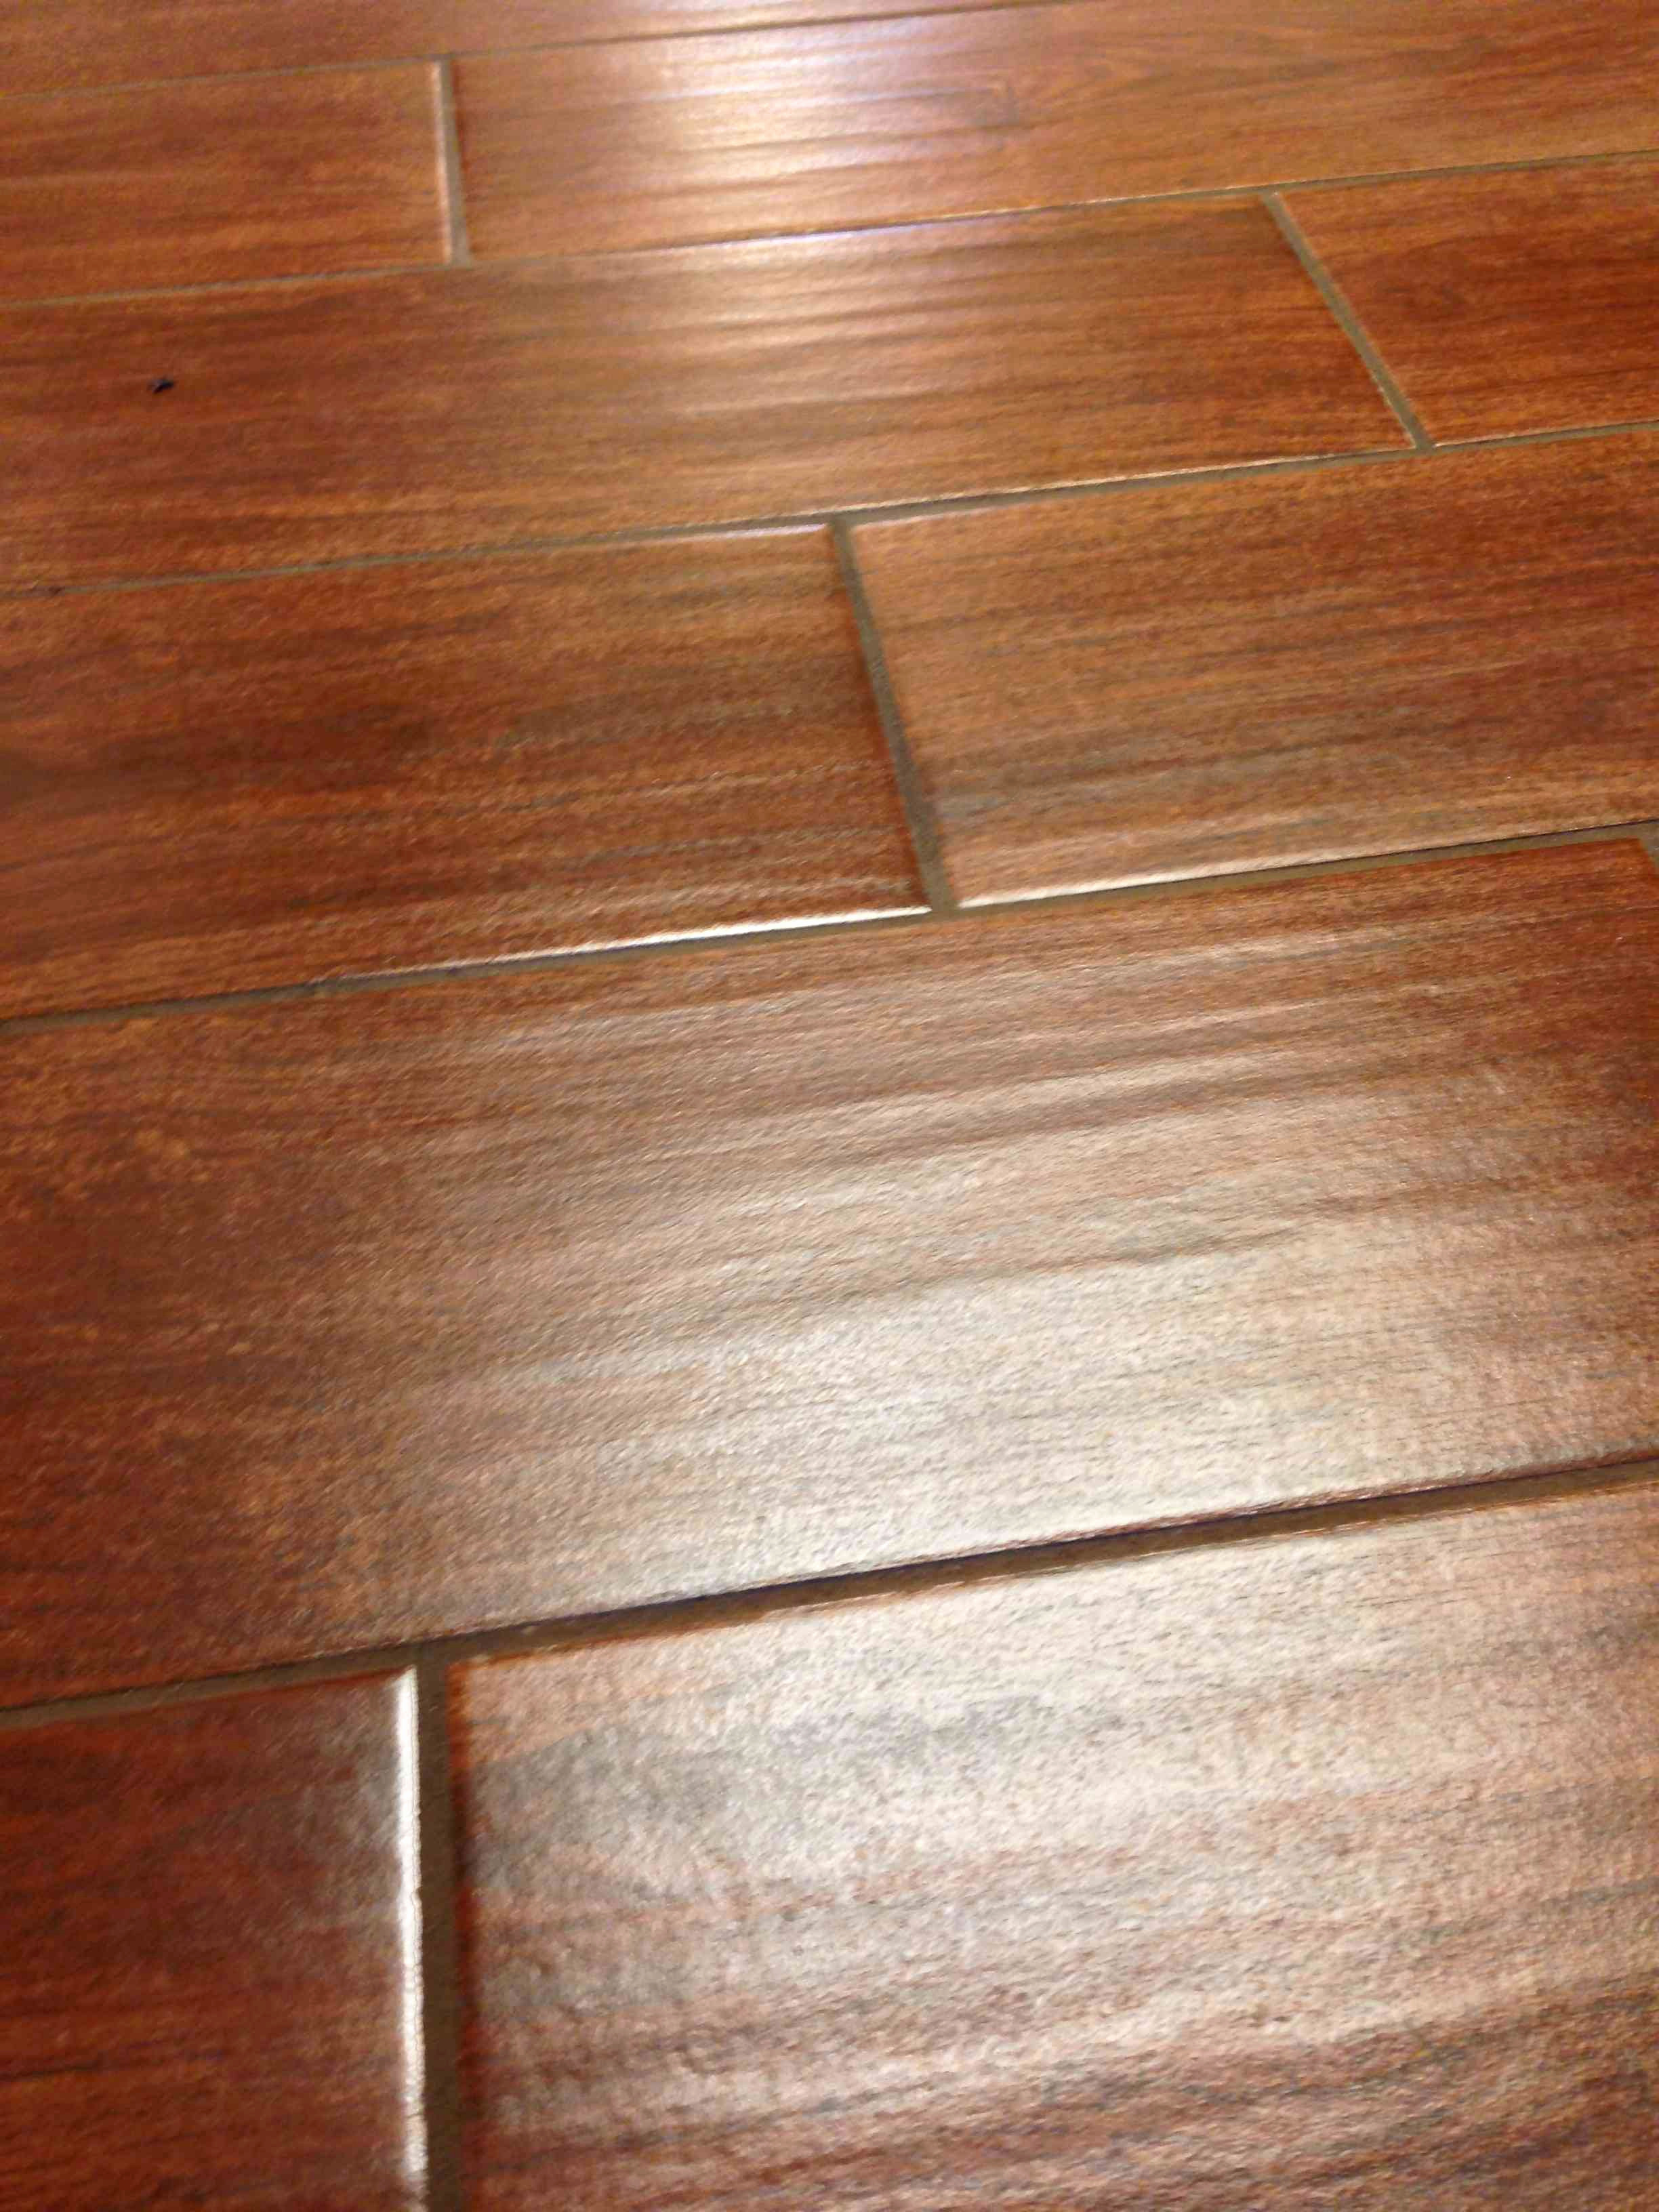 12 Wonderful Stained Hardwood Floors Pictures 2023 free download stained hardwood floors pictures of the wood maker page 2 wood wallpaper for hardwood floor store 50 best real hardwood floors 50 s floor plan ideas of wood floor